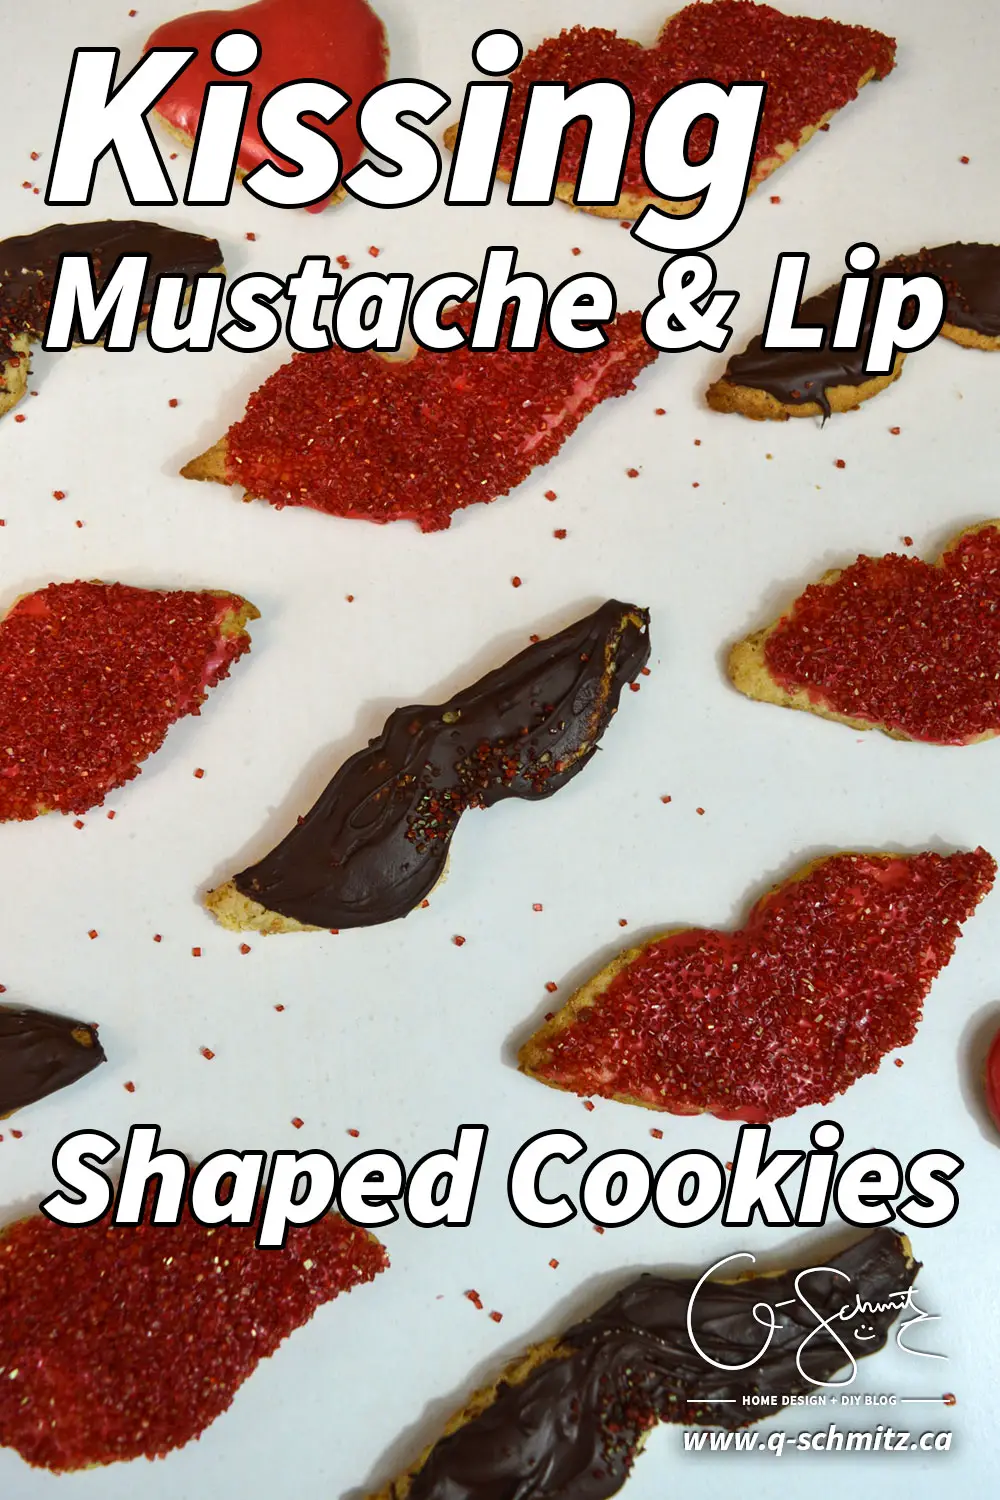 These kissing mustache and lip shaped cookies were a cute little idea I had to decorate my sugar cookies for Valentine's Day this year. Check them out!